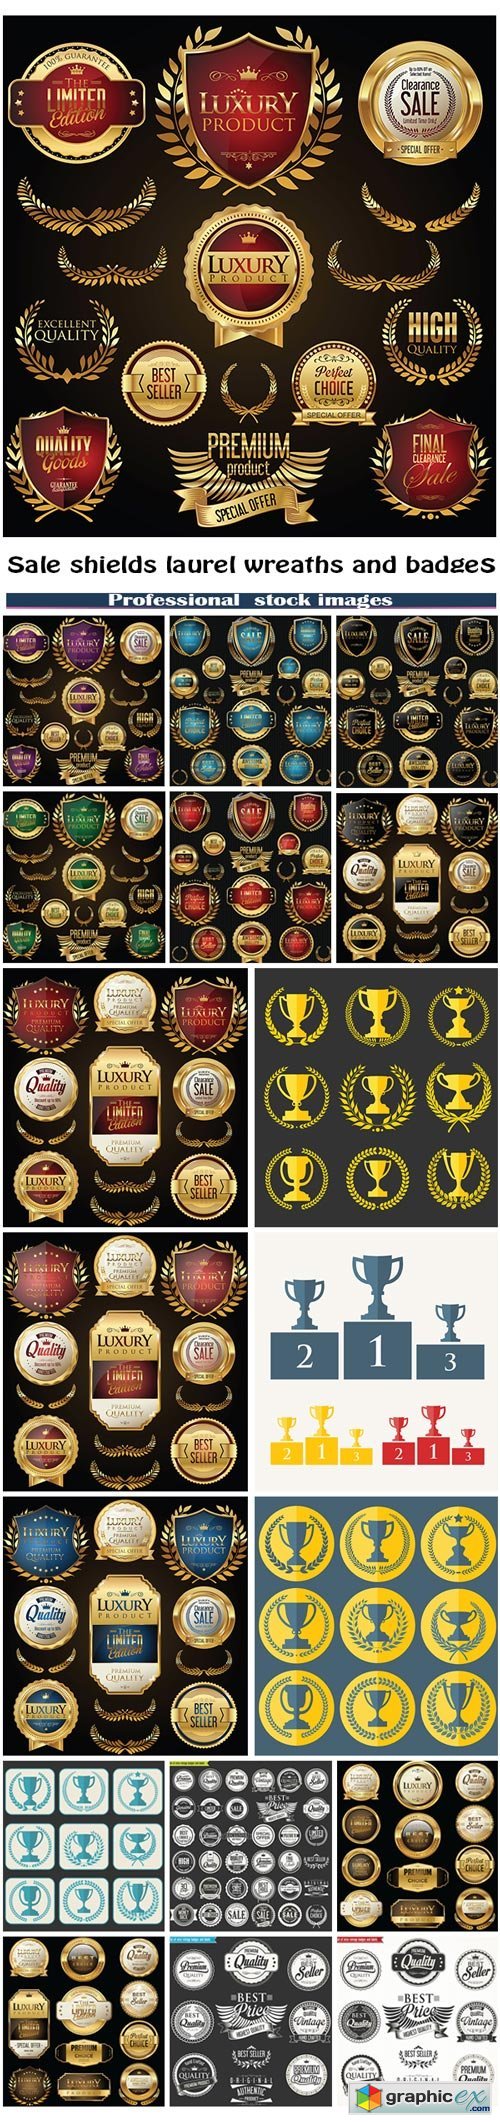 Golden sale shields laurel wreaths and badges, trophy and awards collection